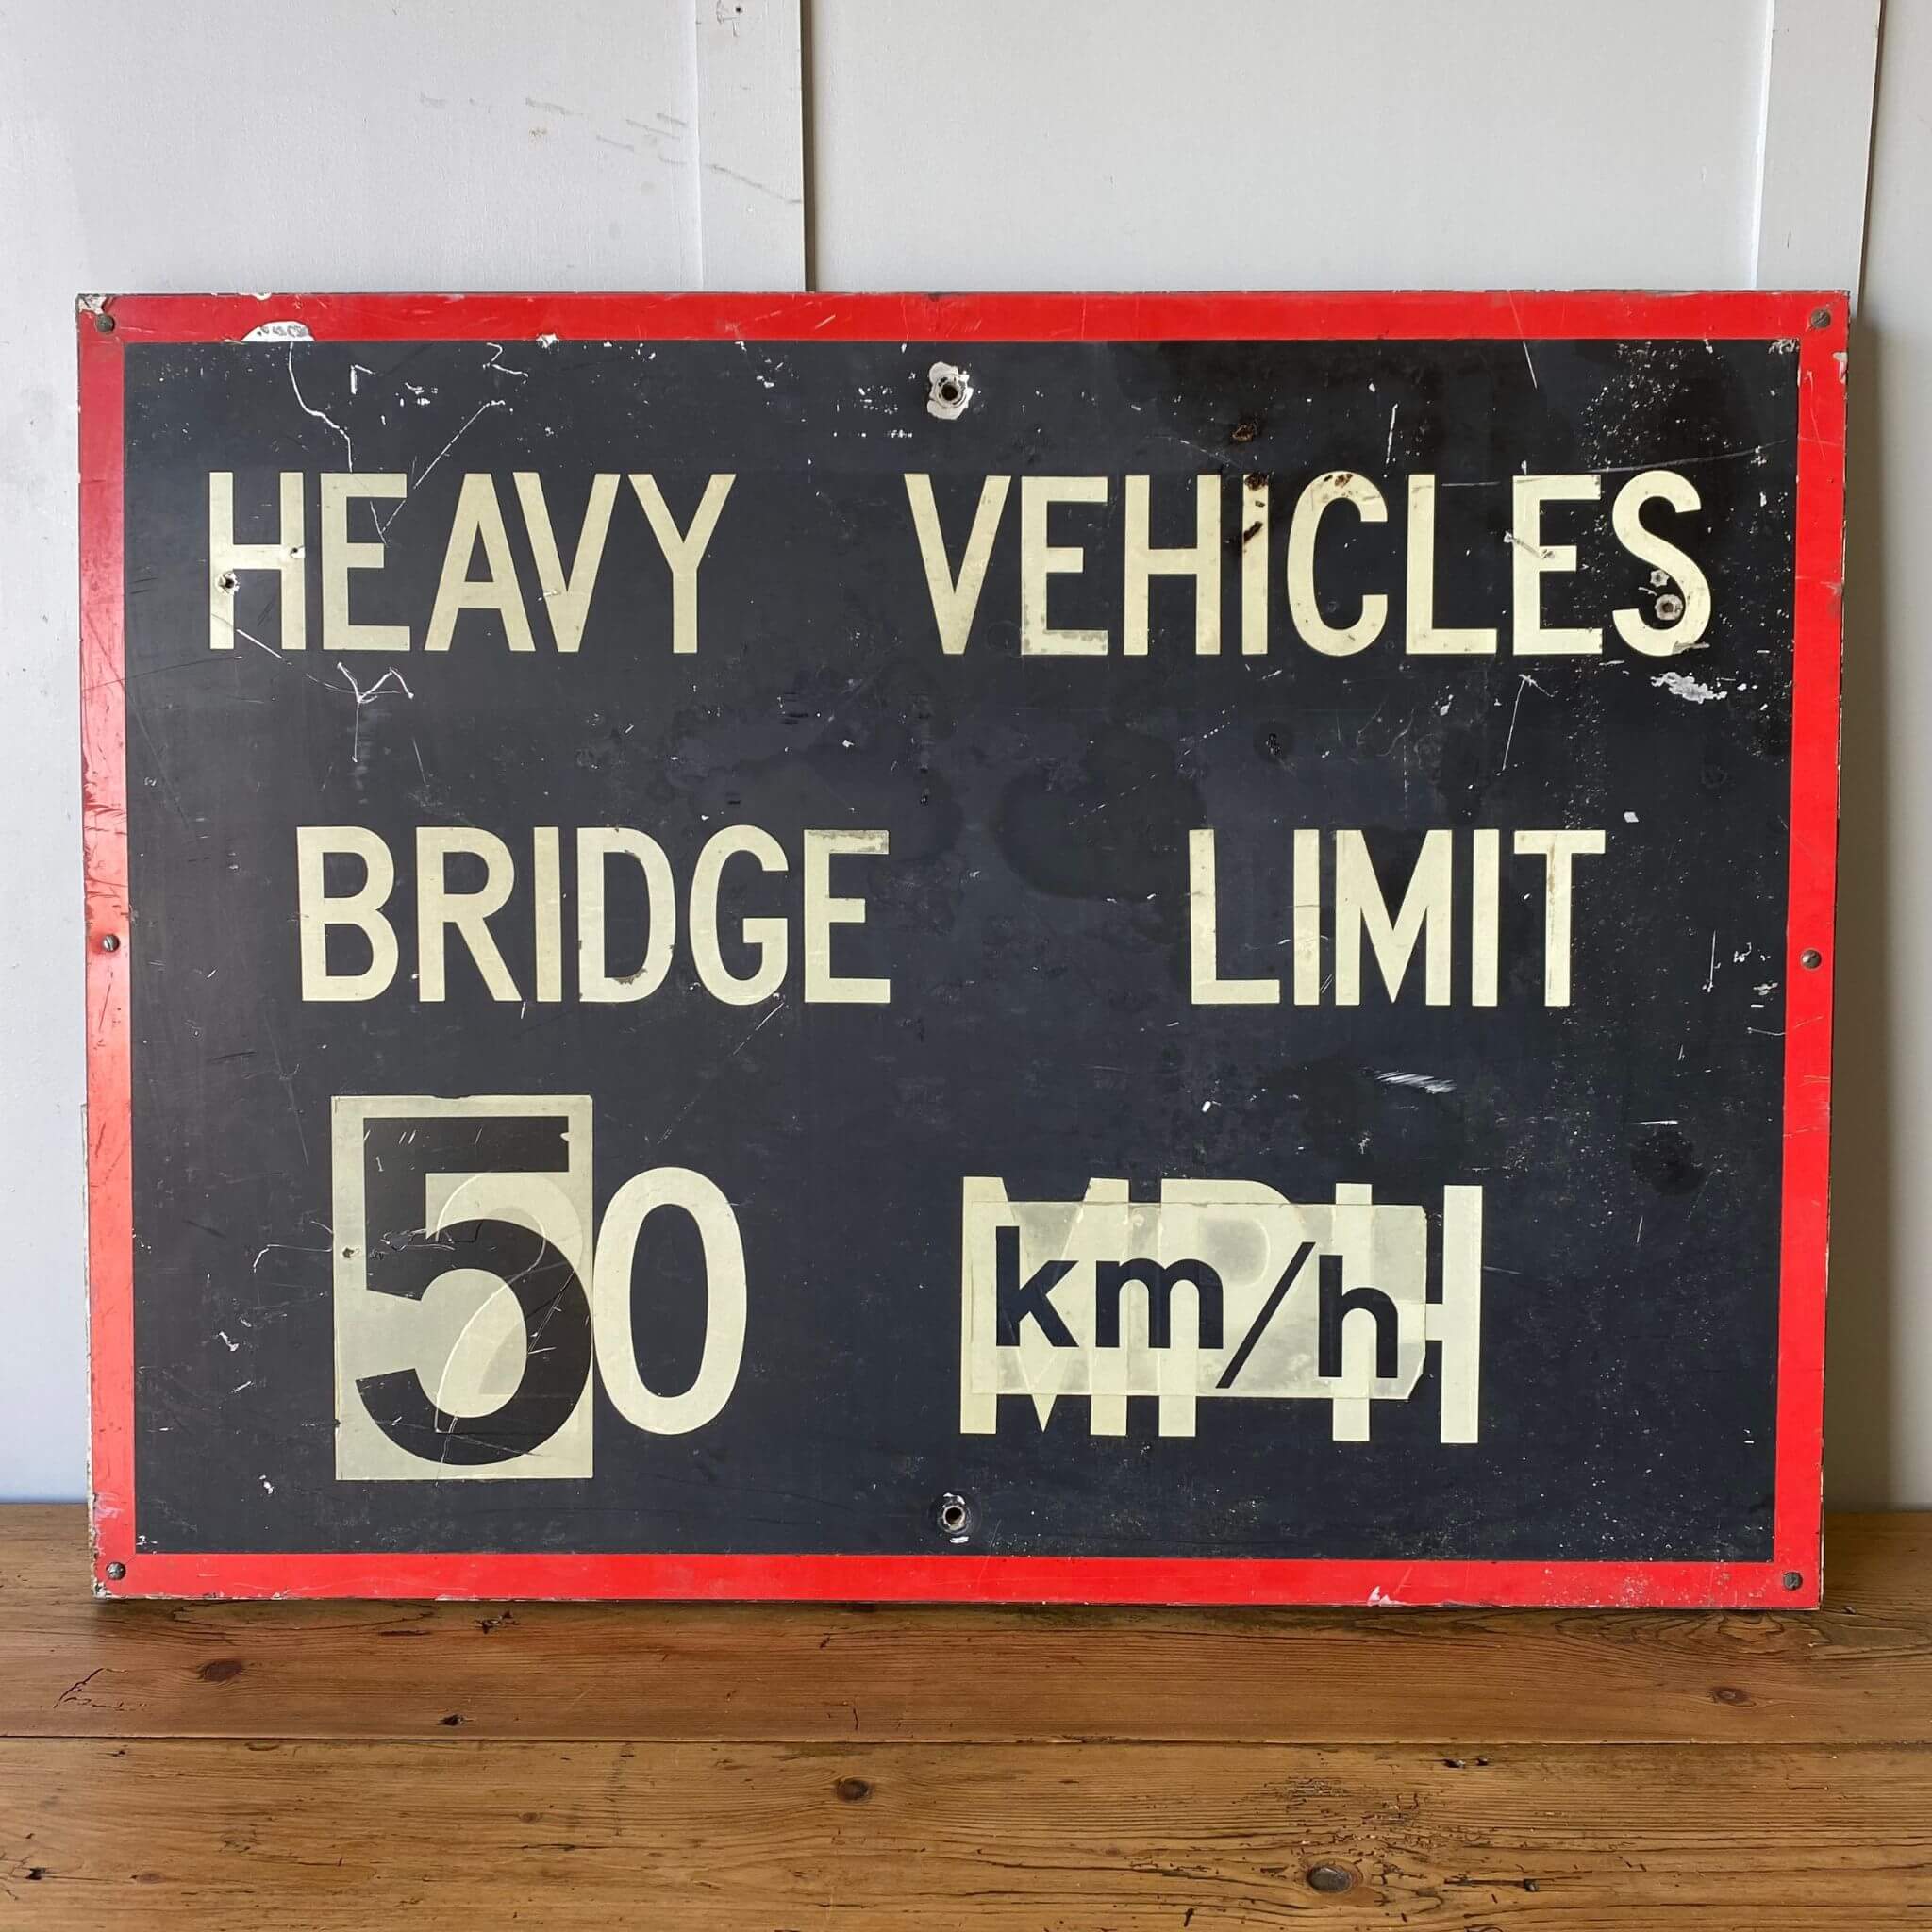 Vintage collectible road sign